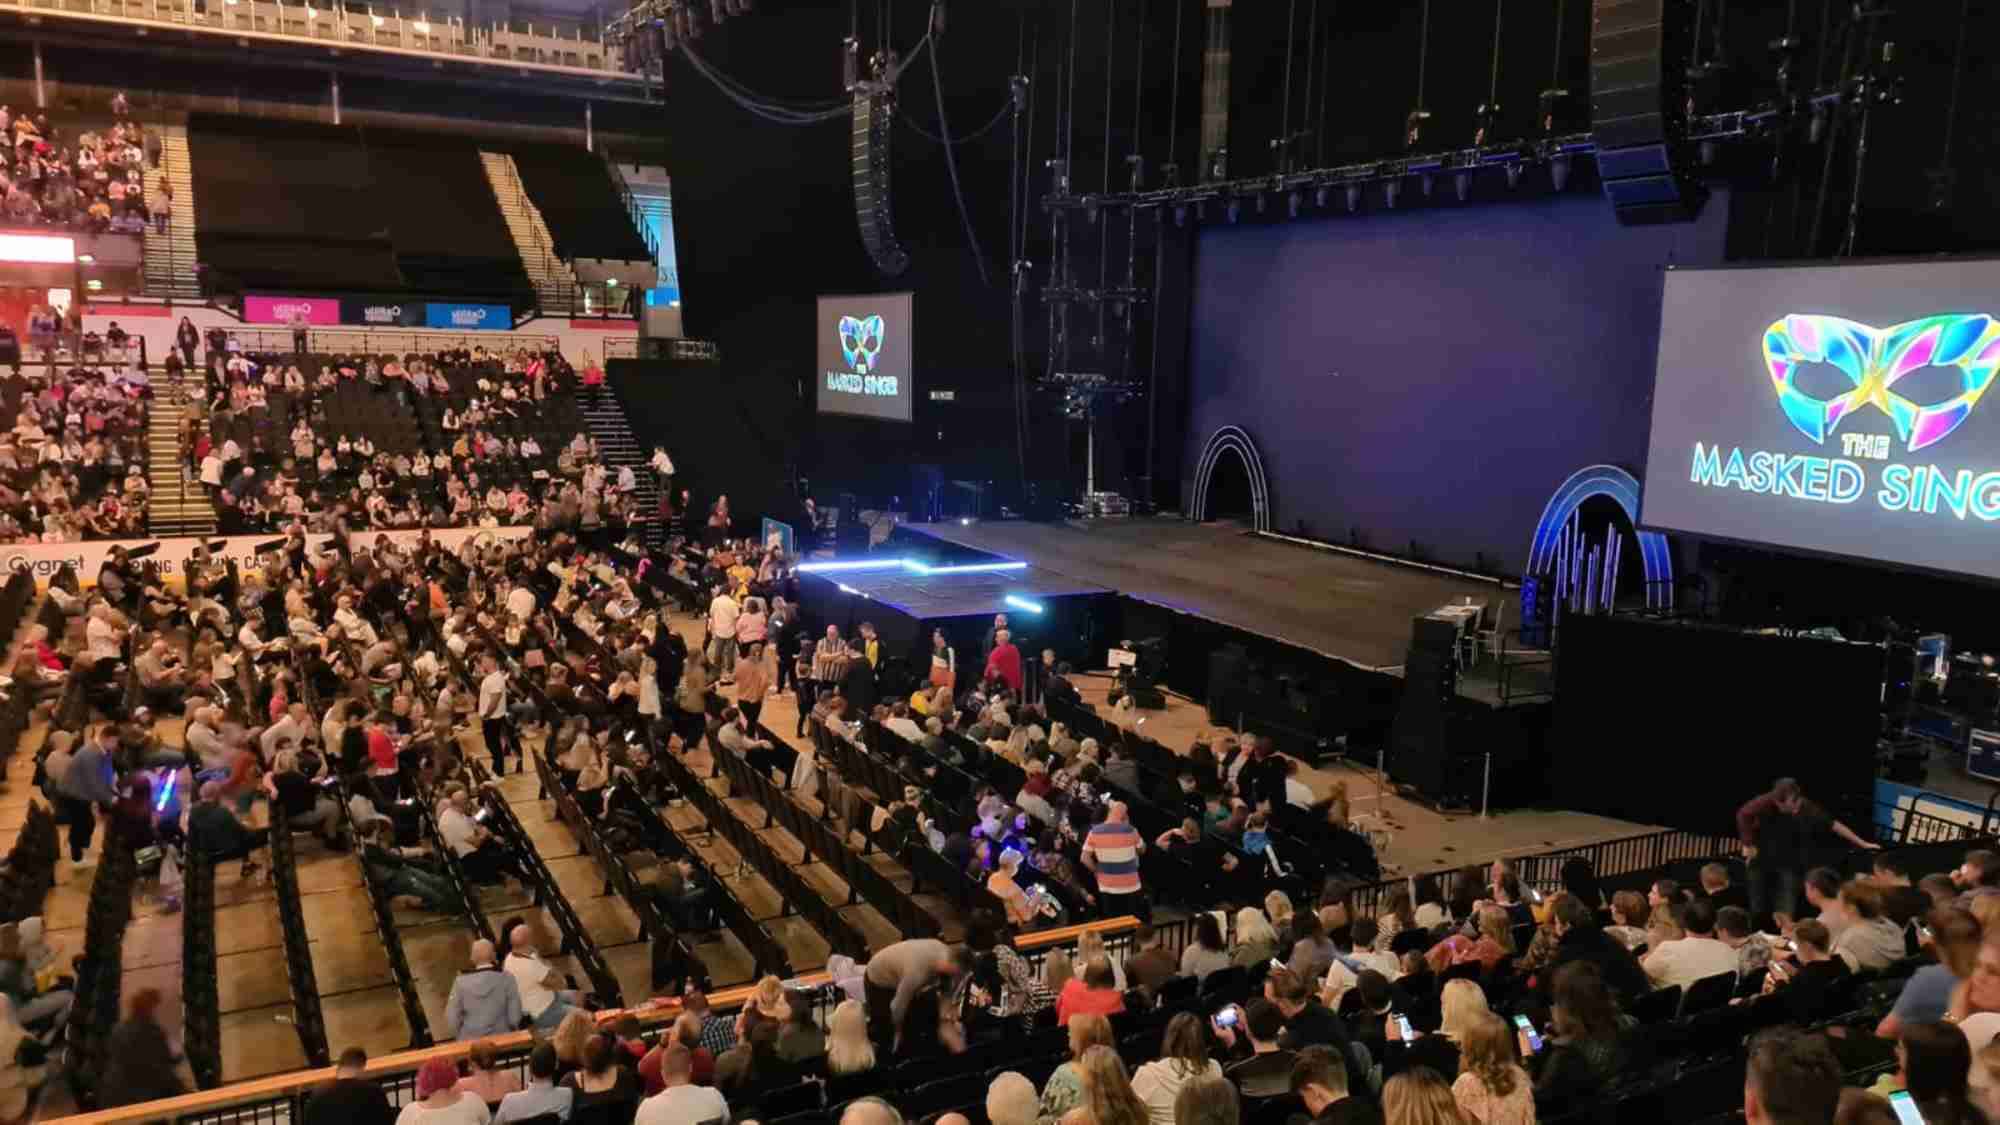 View of The Masked Singer at Utilita Arena Sheffield from Seat Block 119